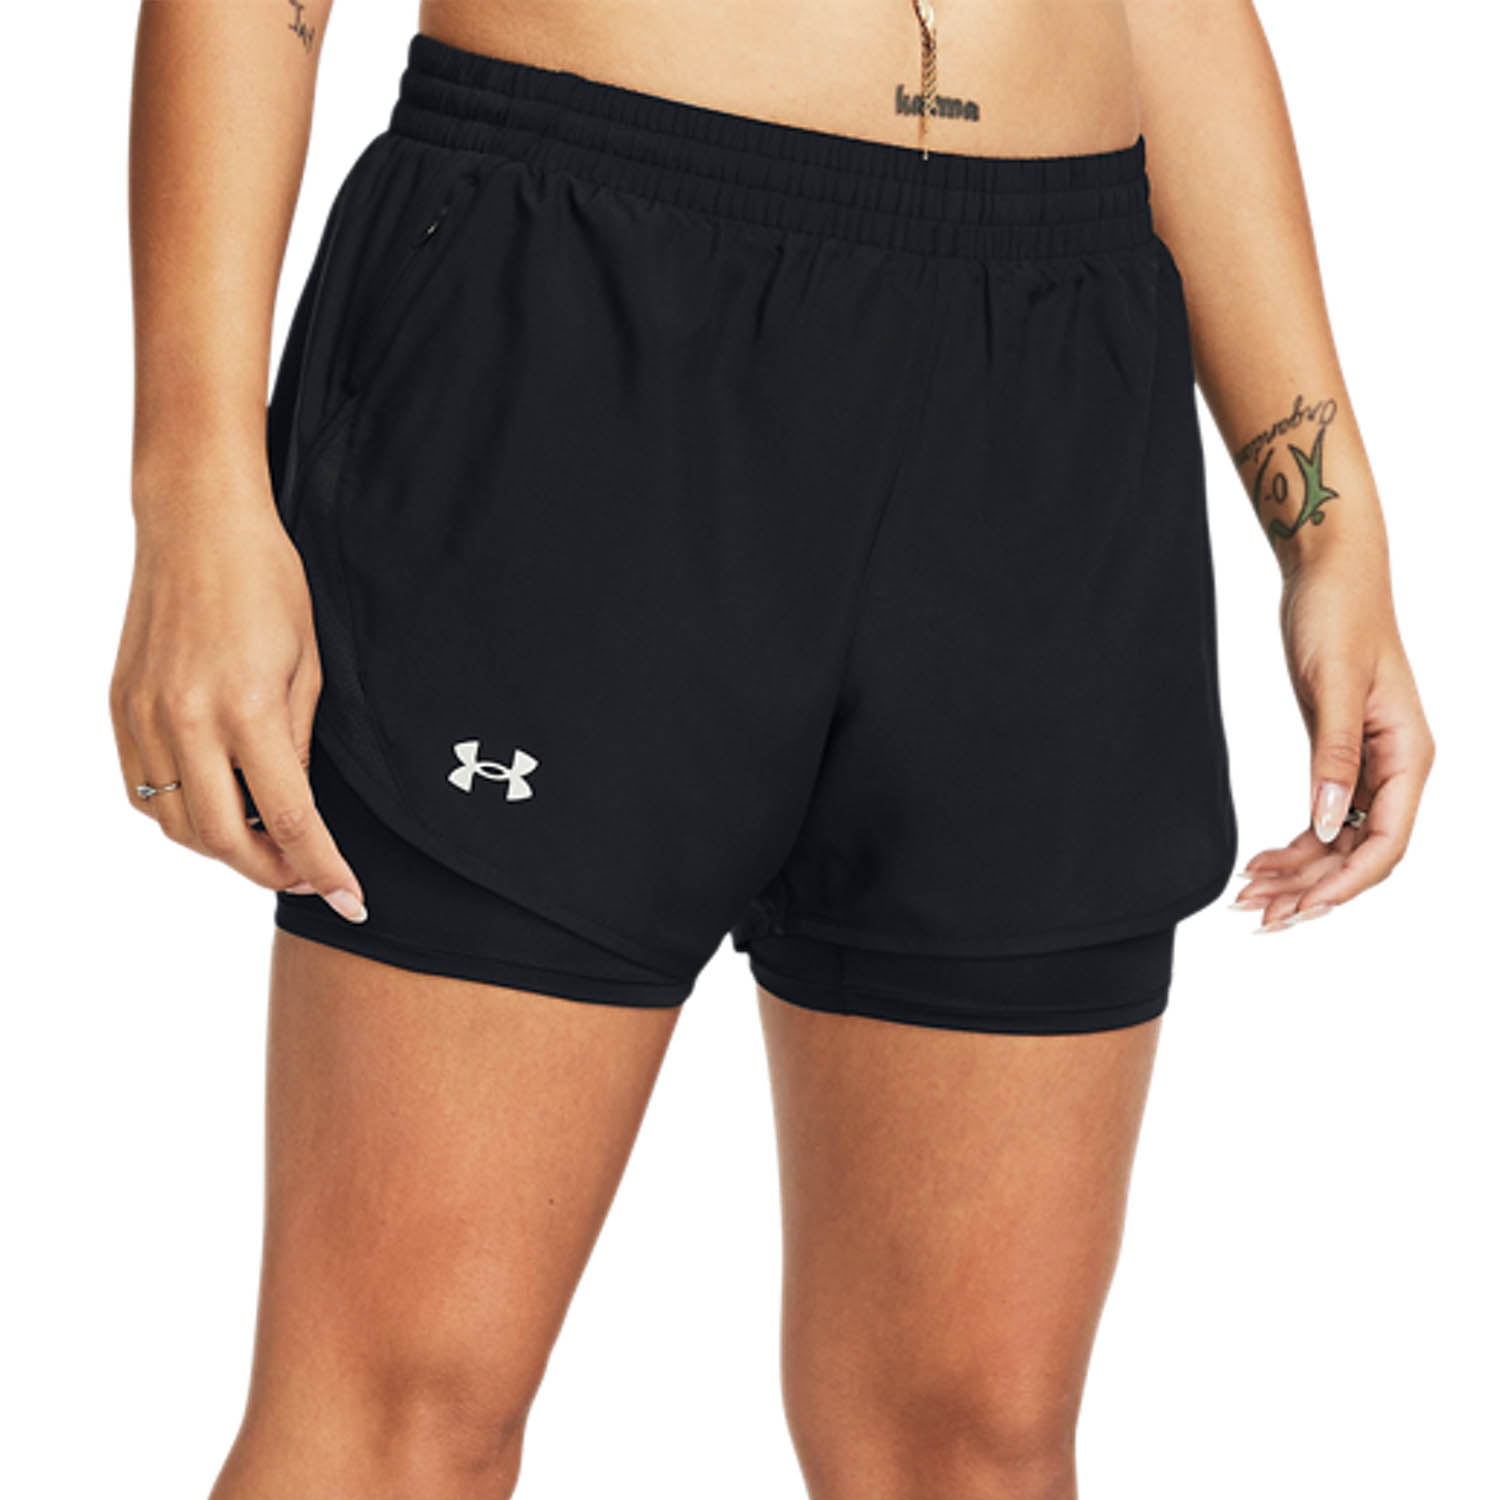 Under Armour Fly By 2 in 1 4in Shorts - Black/Reflective